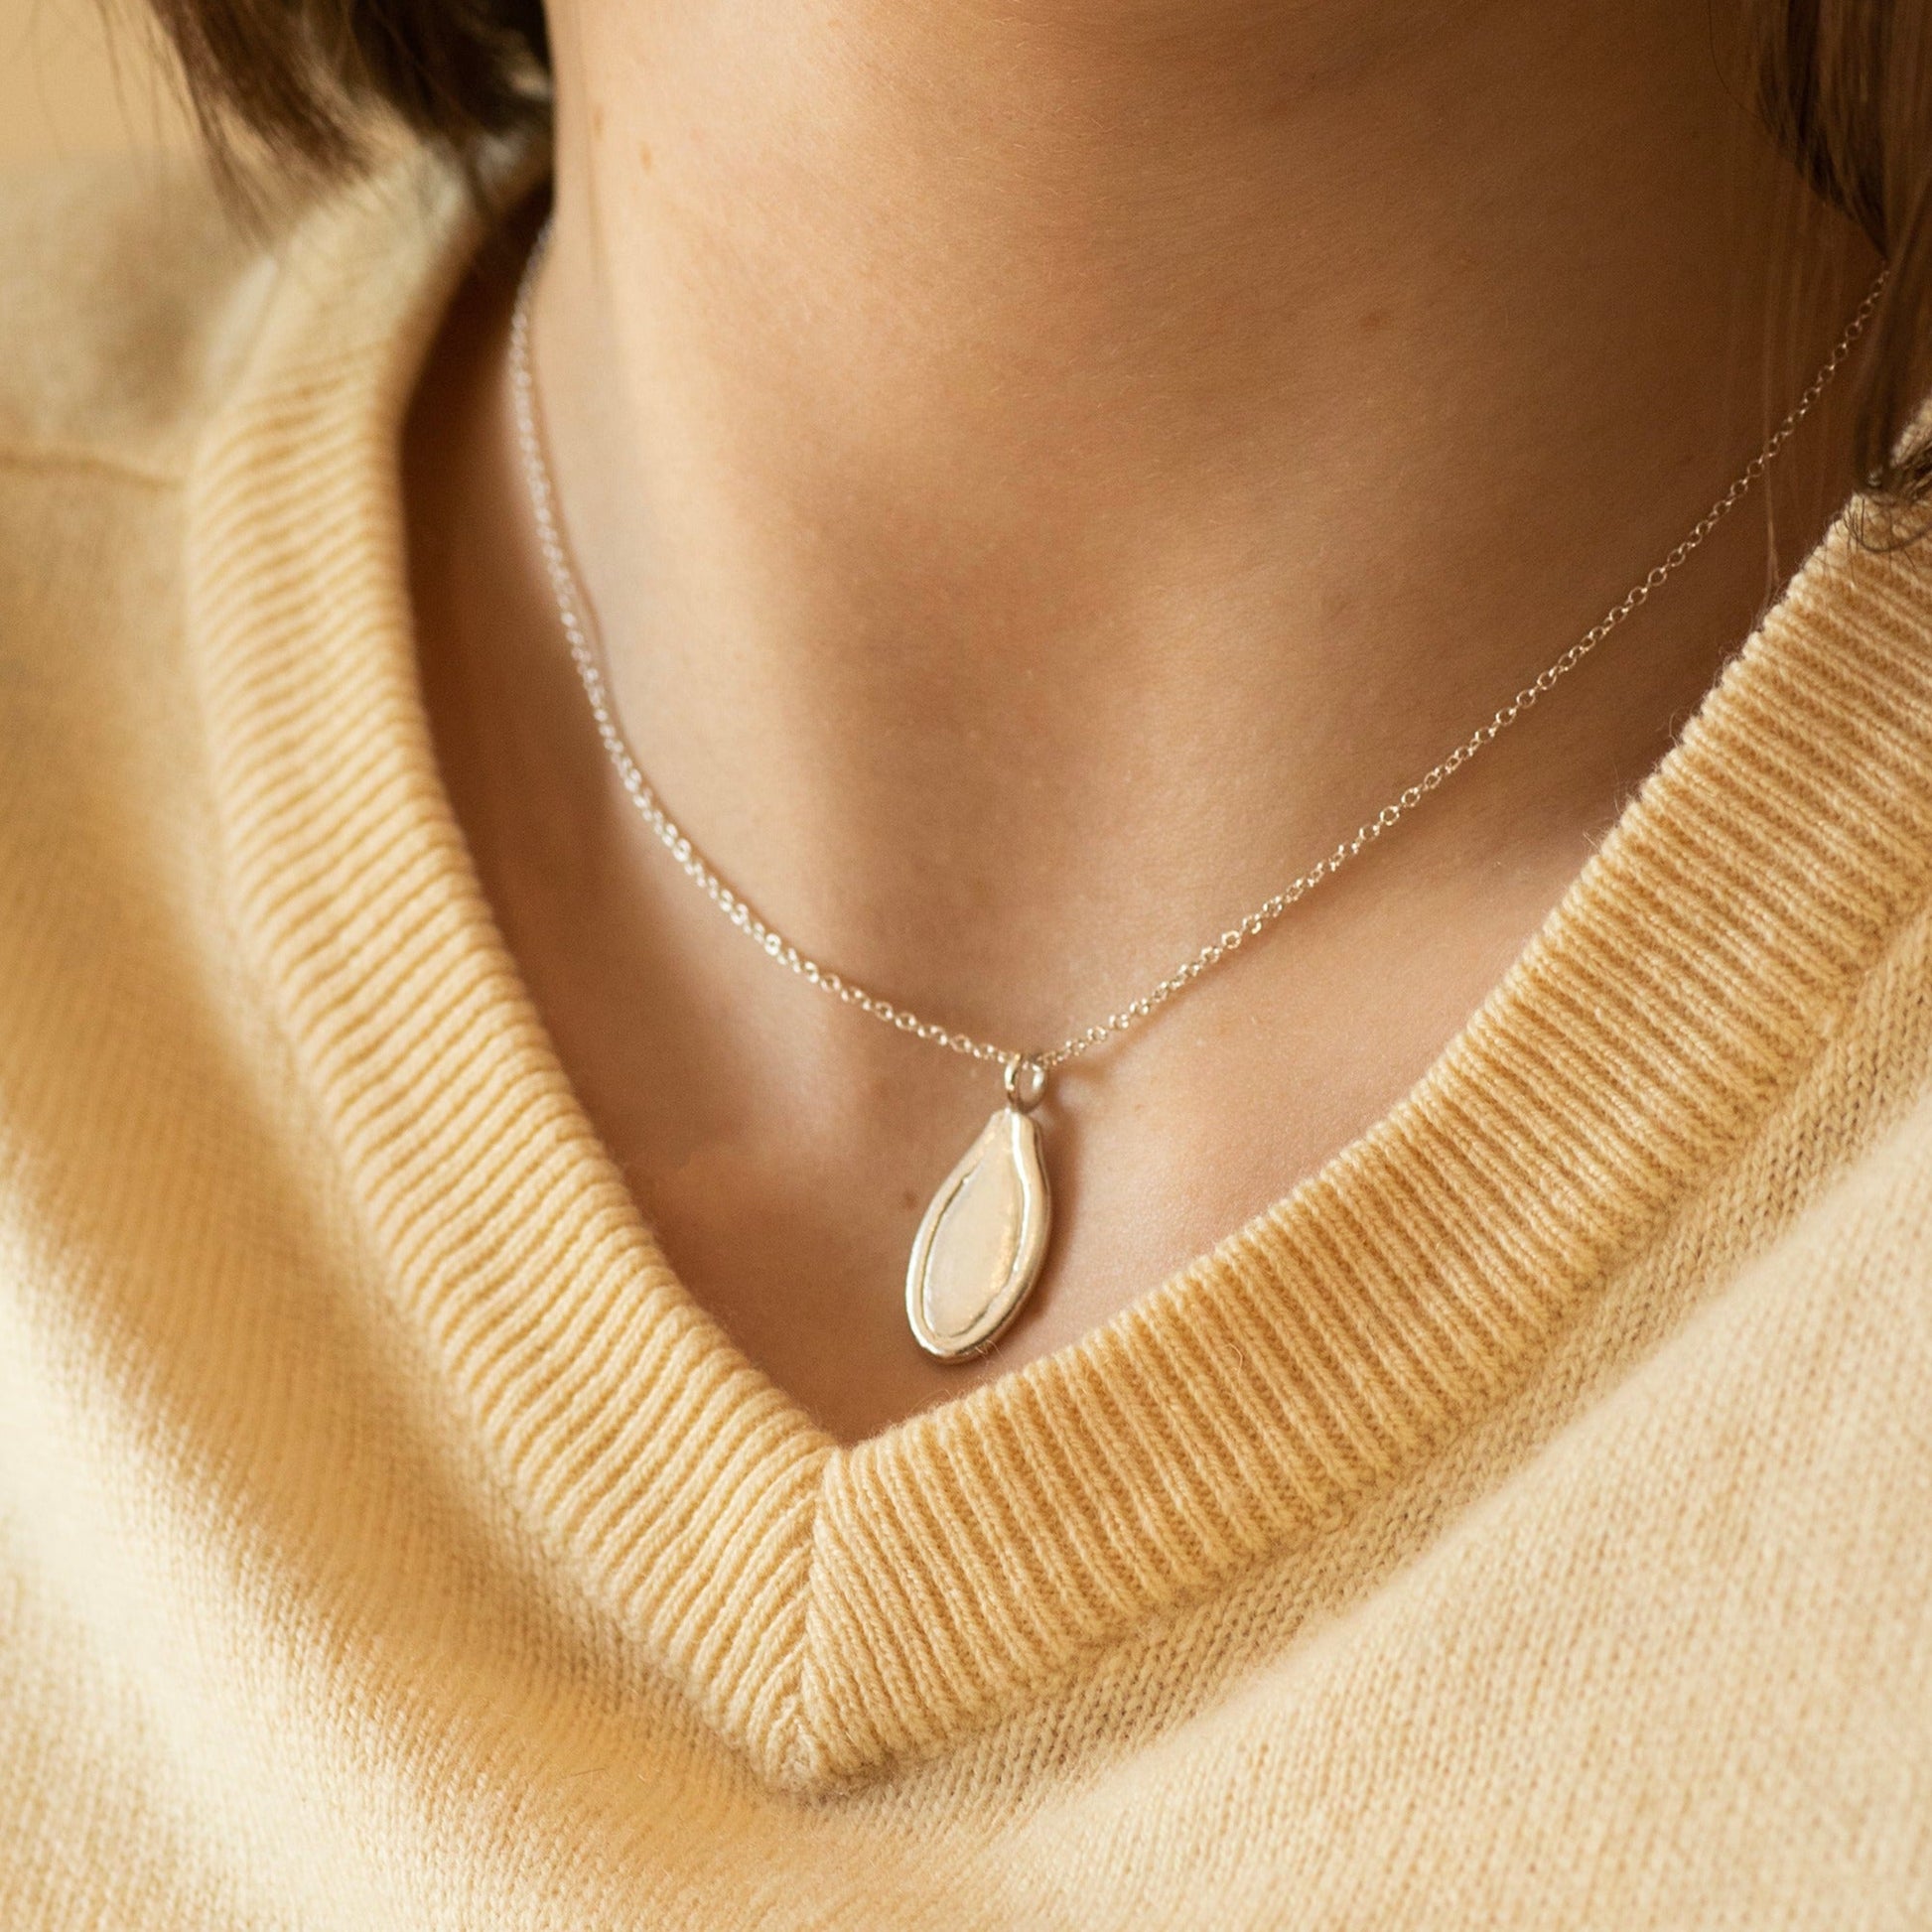 Silver seed necklace